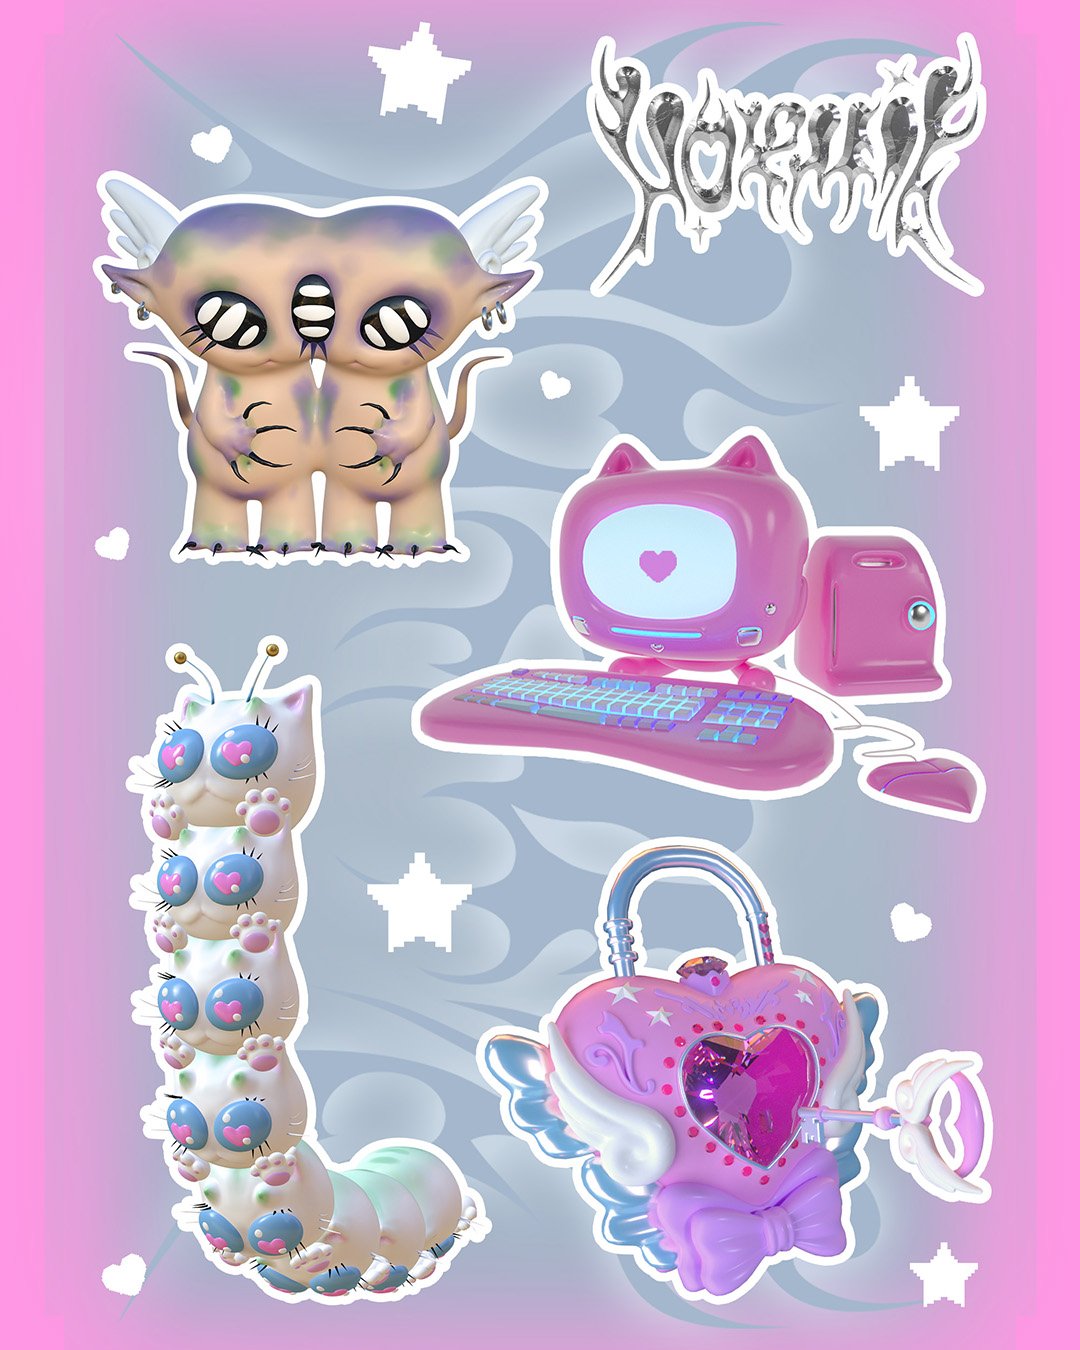  ˗ˏˋ ꒰ ♡ ꒱ ˎˊ˗ Normie Sticker Pack ˗ˏˋ ꒰ ♡ ꒱ ˎˊ˗